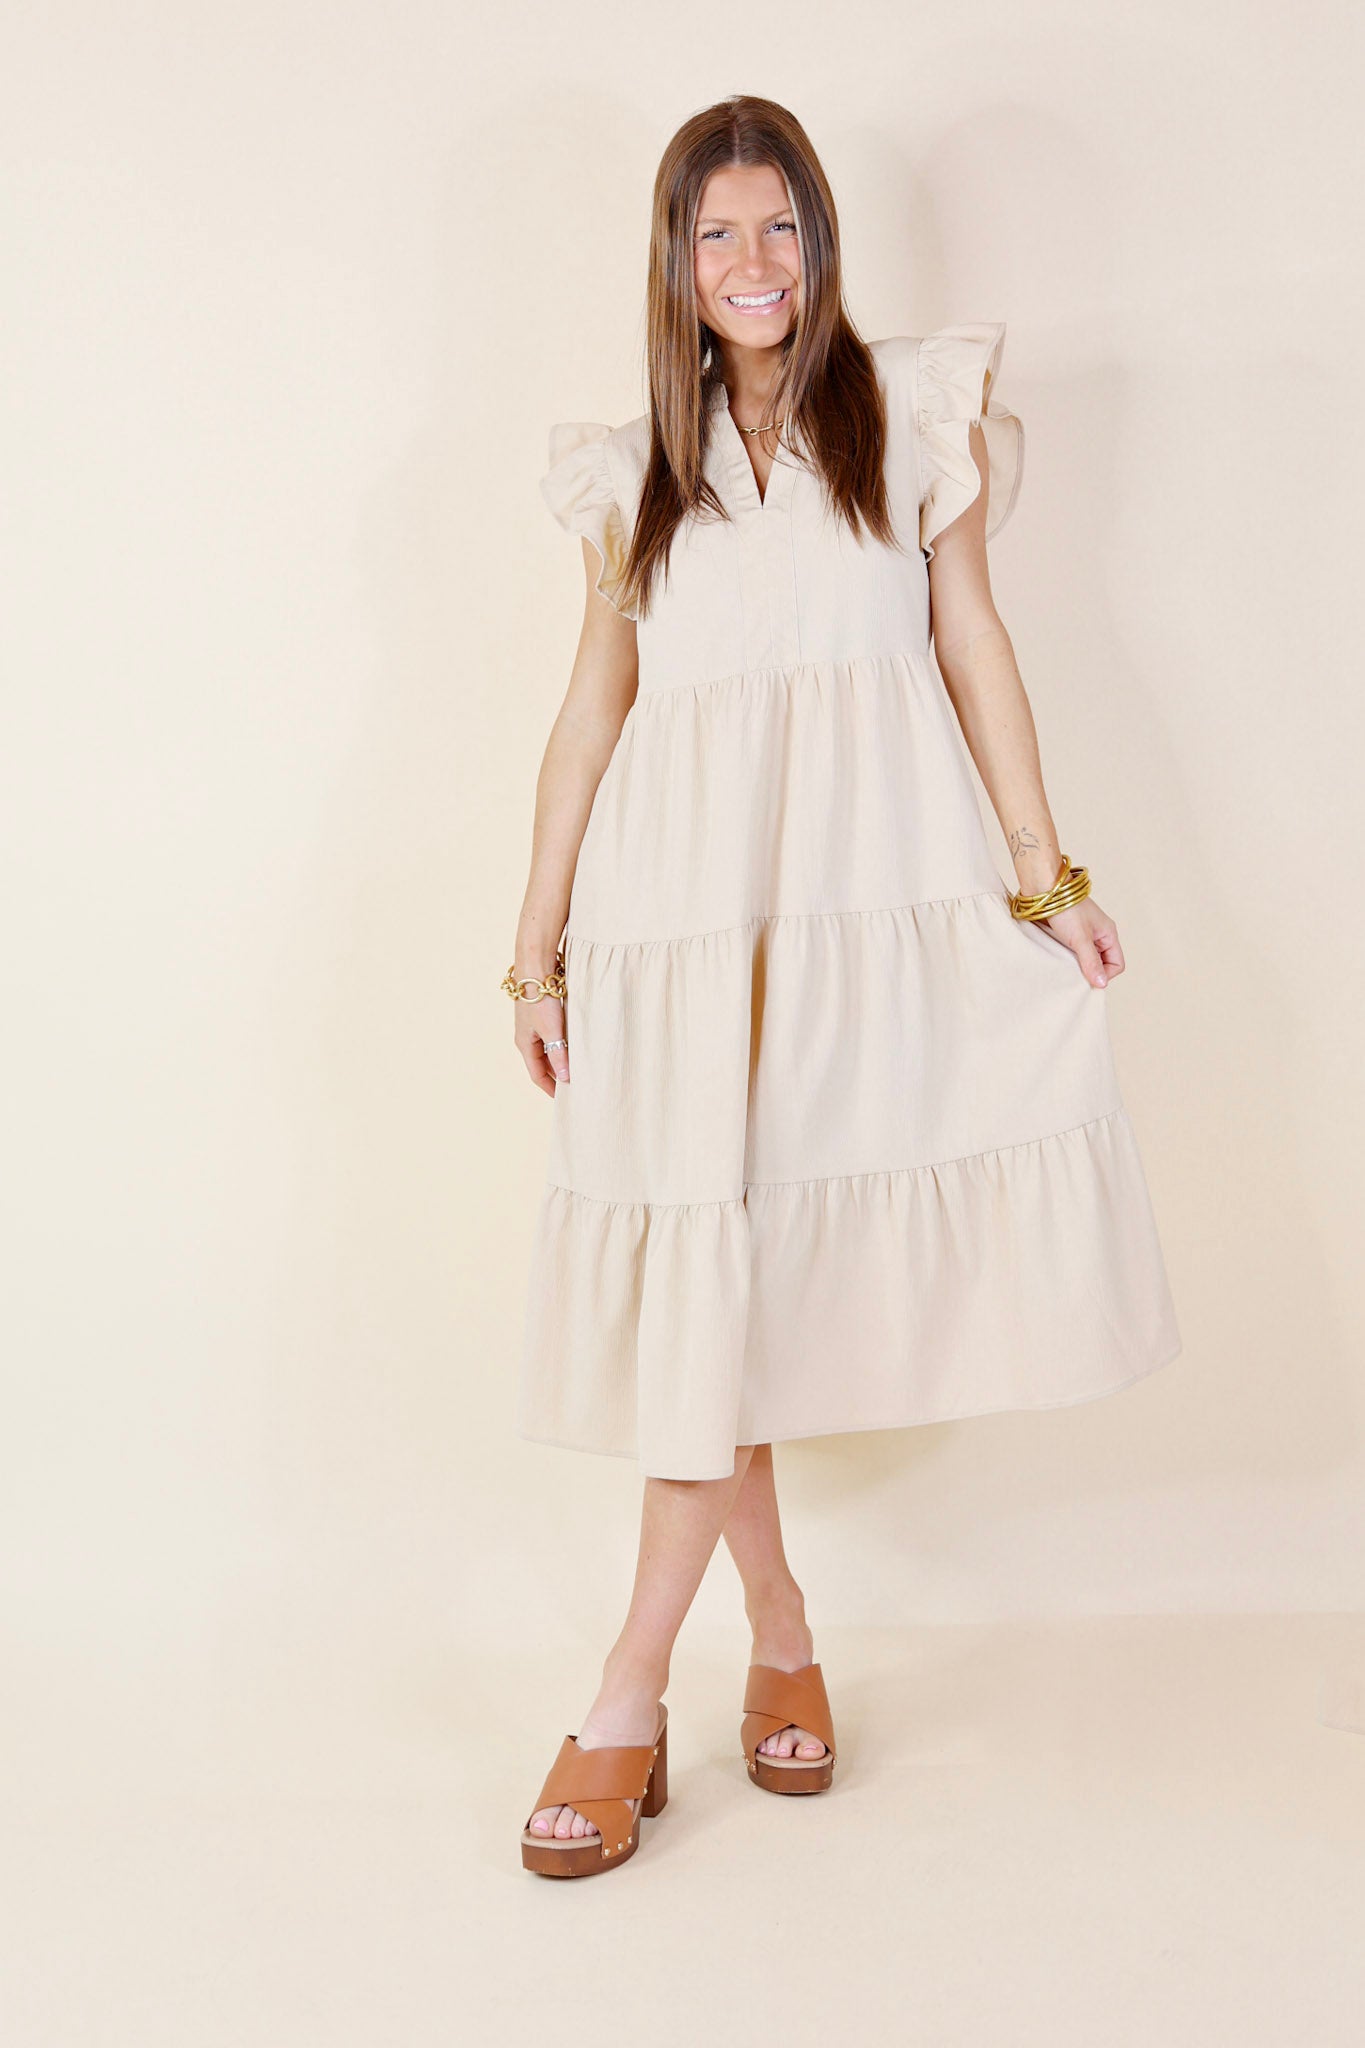 Magnolia Morning Ruffle Cap Sleeve Tiered Midi Dress in Cream - Giddy Up Glamour Boutique